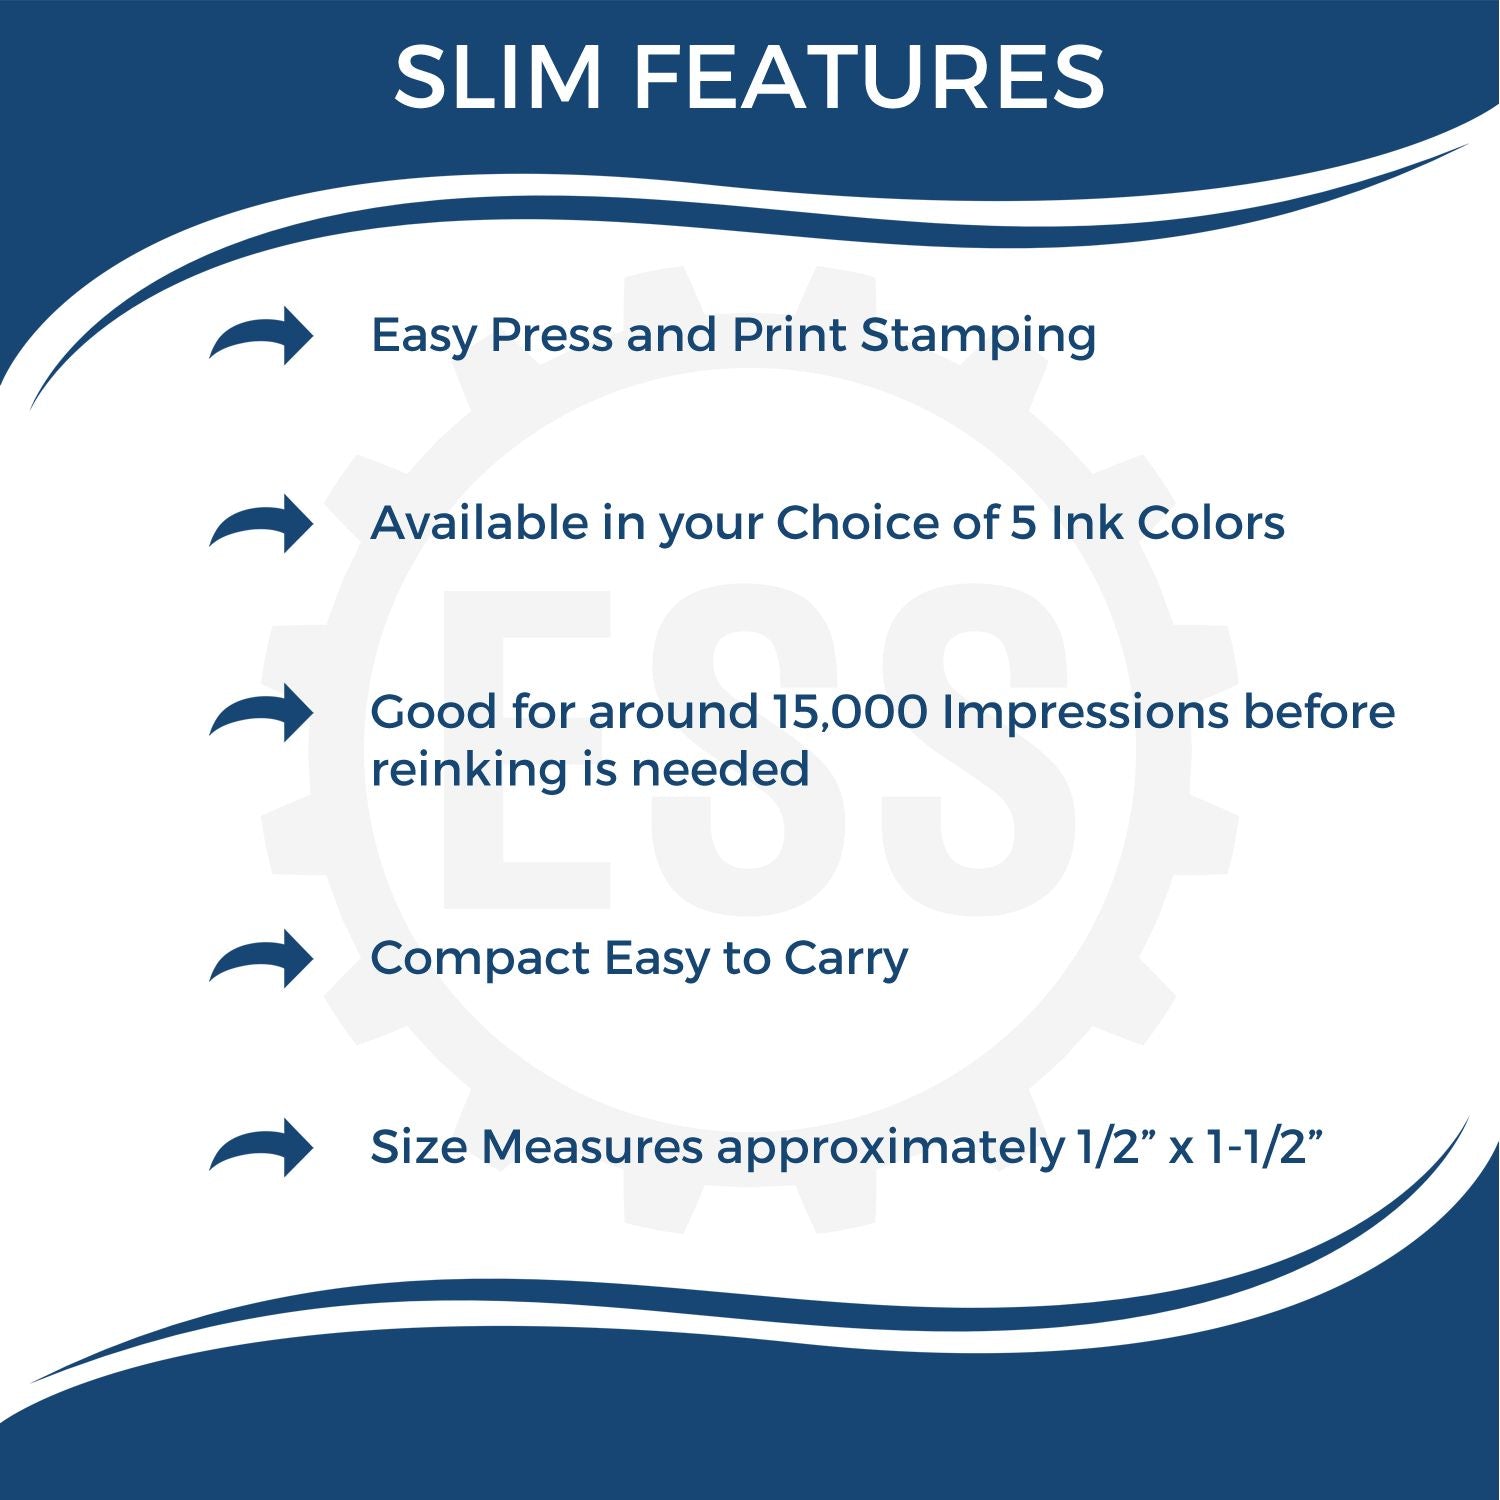 Slim Pre-Inked Times Faxed Stamp